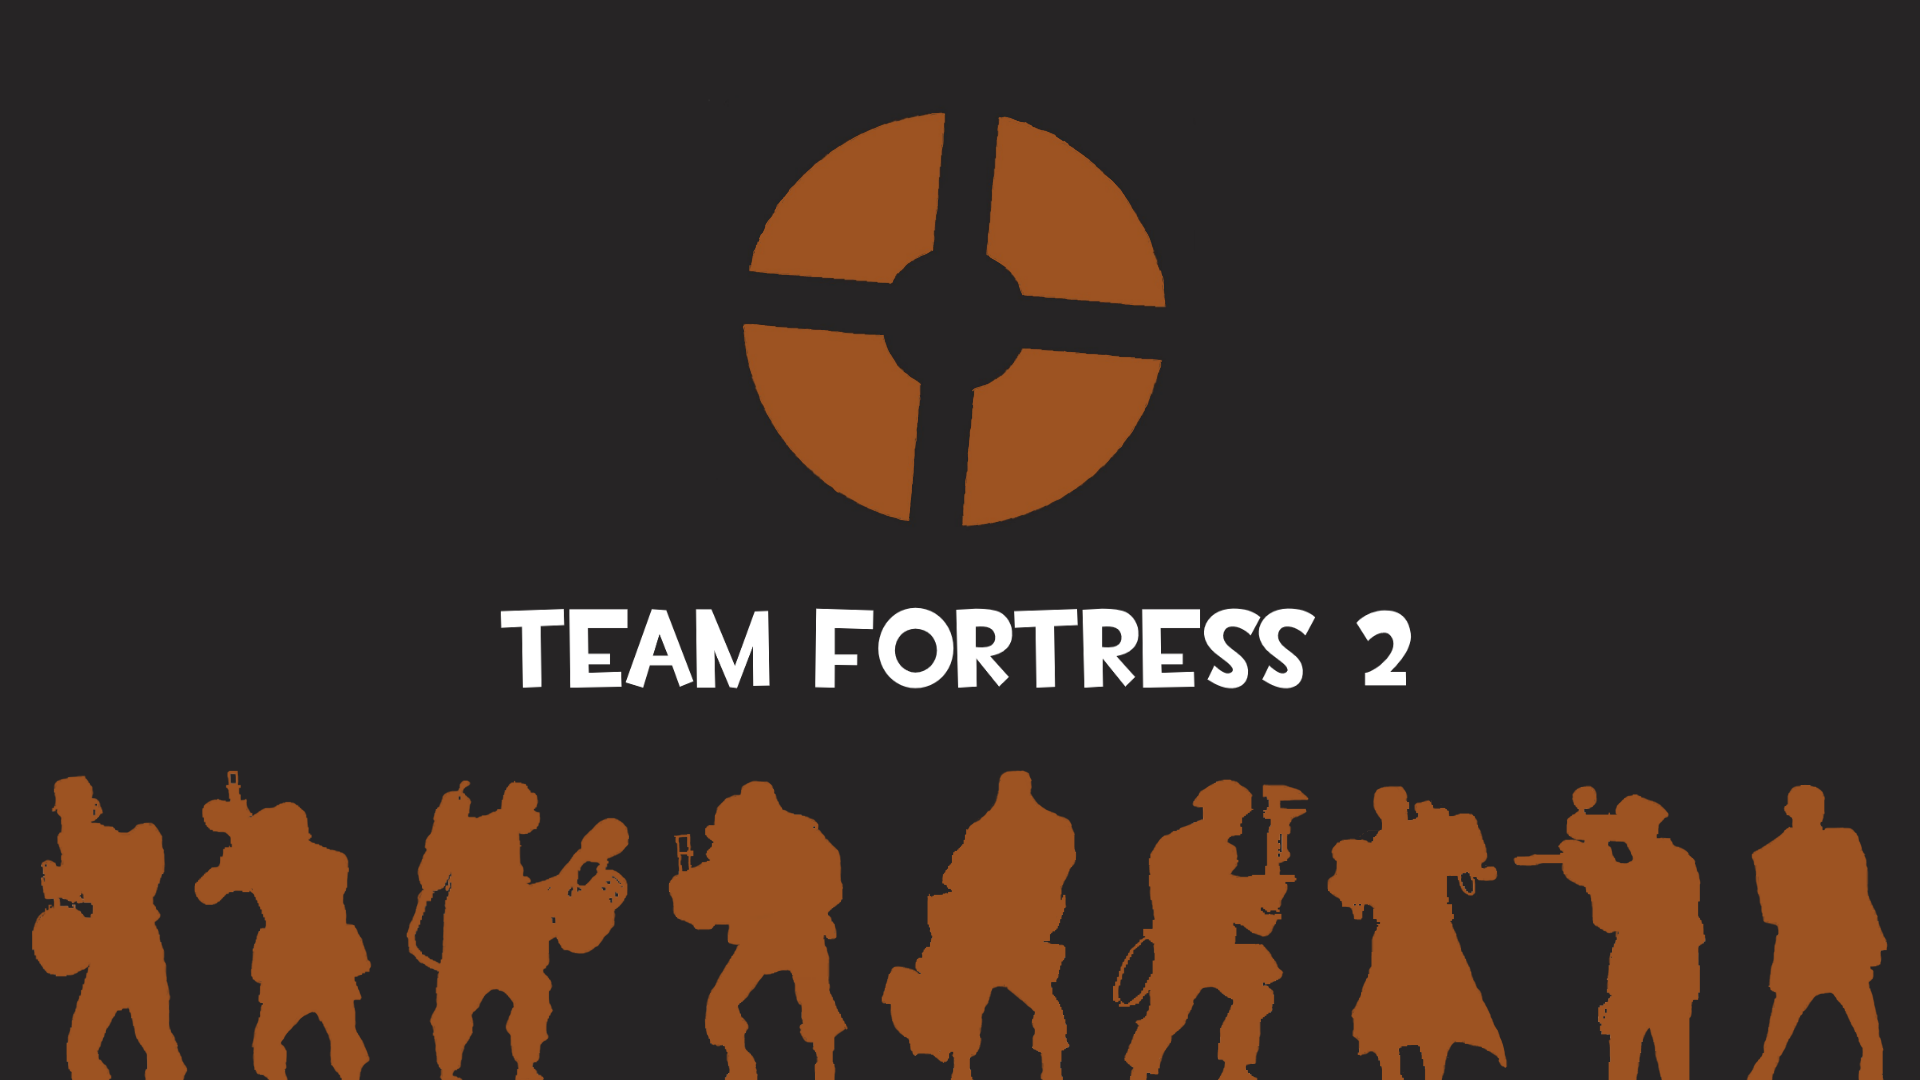 I Made A Pc Wallpaper Based On Tf2 It Aint Good But Tried